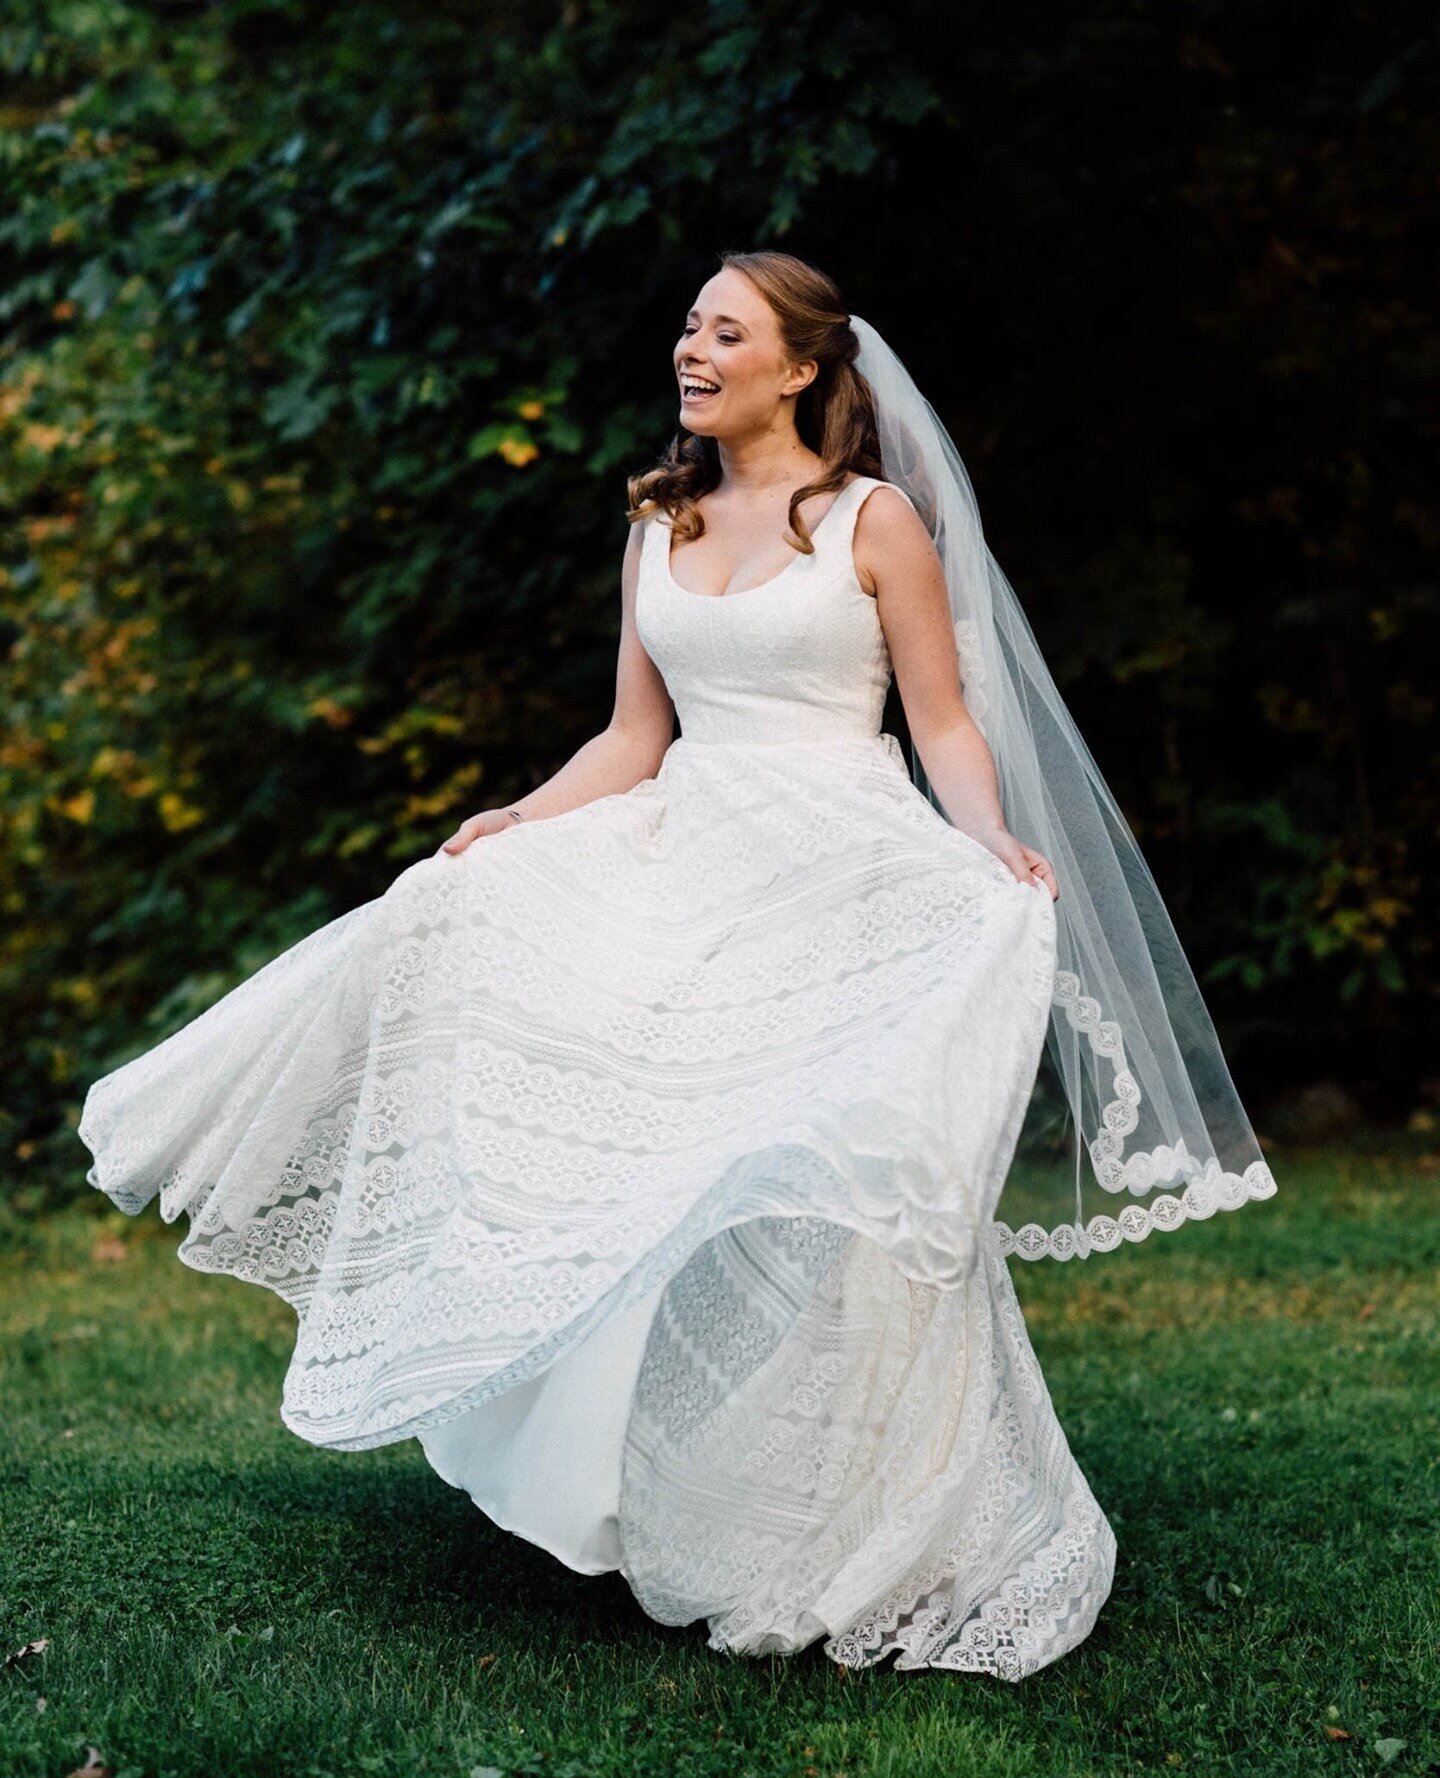 AH!!!! That feeling of hope and excitement has been missing for so long!!! Happy almost weekend! Here's Missy spinning into the weekend from her wedding at Ohana Camp in Vermont!⁠
.⁠
.⁠
.⁠
.⁠
.⁠
.⁠
.⁠
#junebugweddings⁠
#Photobugcommunity⁠
#elopementc